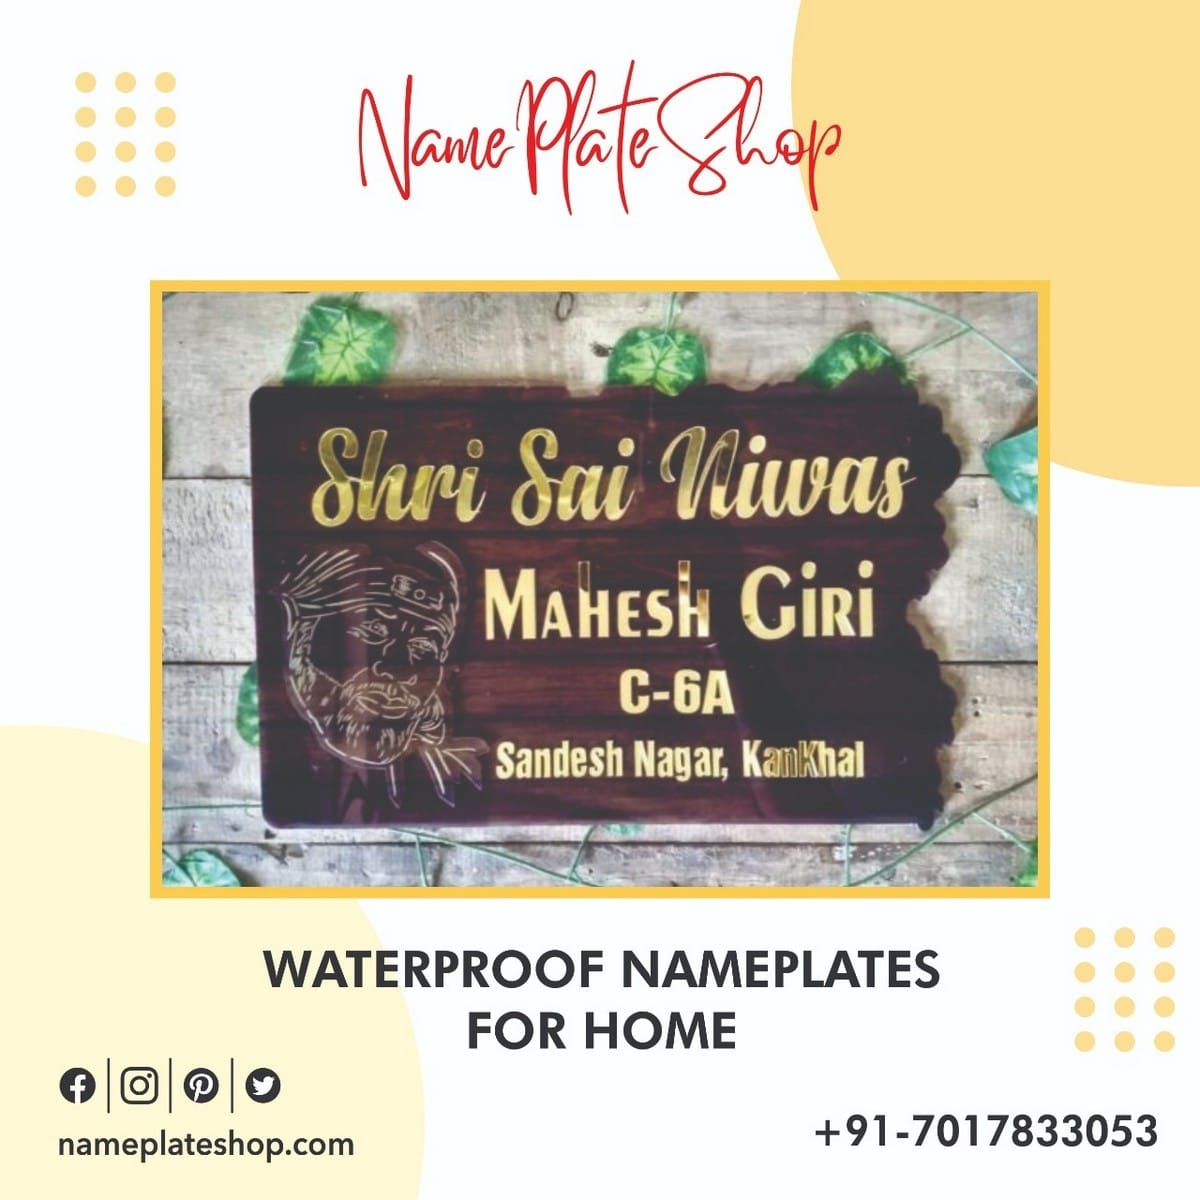 waterproof nameplates for home